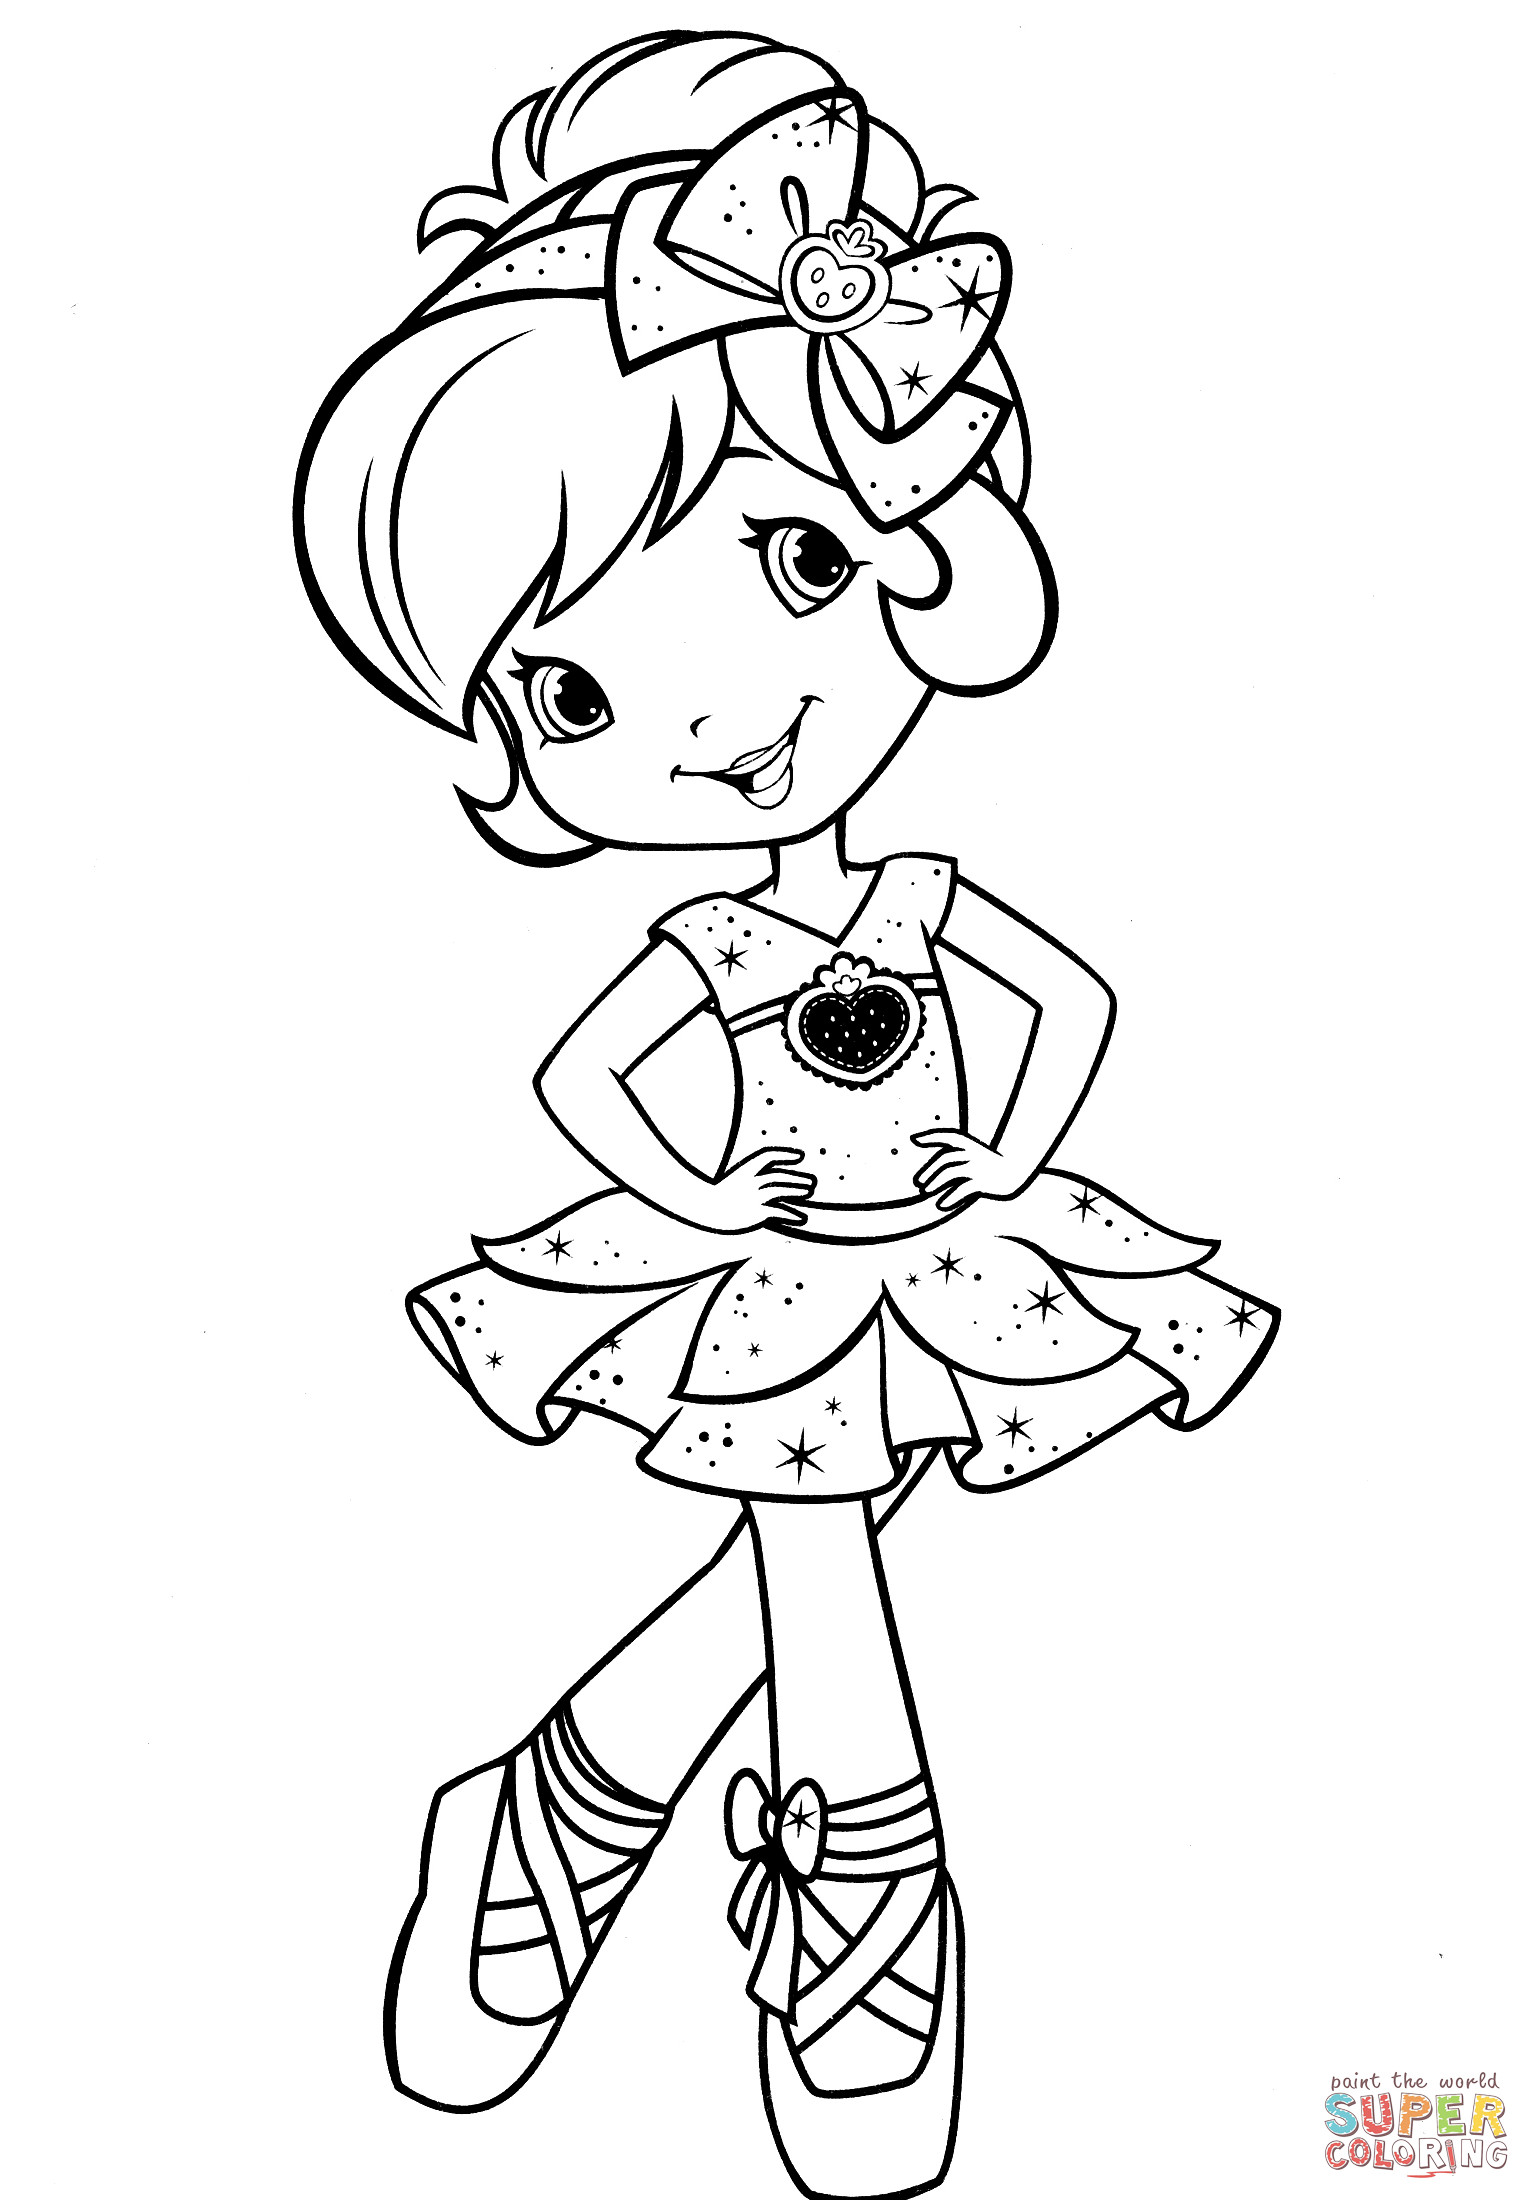 Ballerina Coloring Pages For Kids
 Strawberry Shortcake Ballerina coloring page